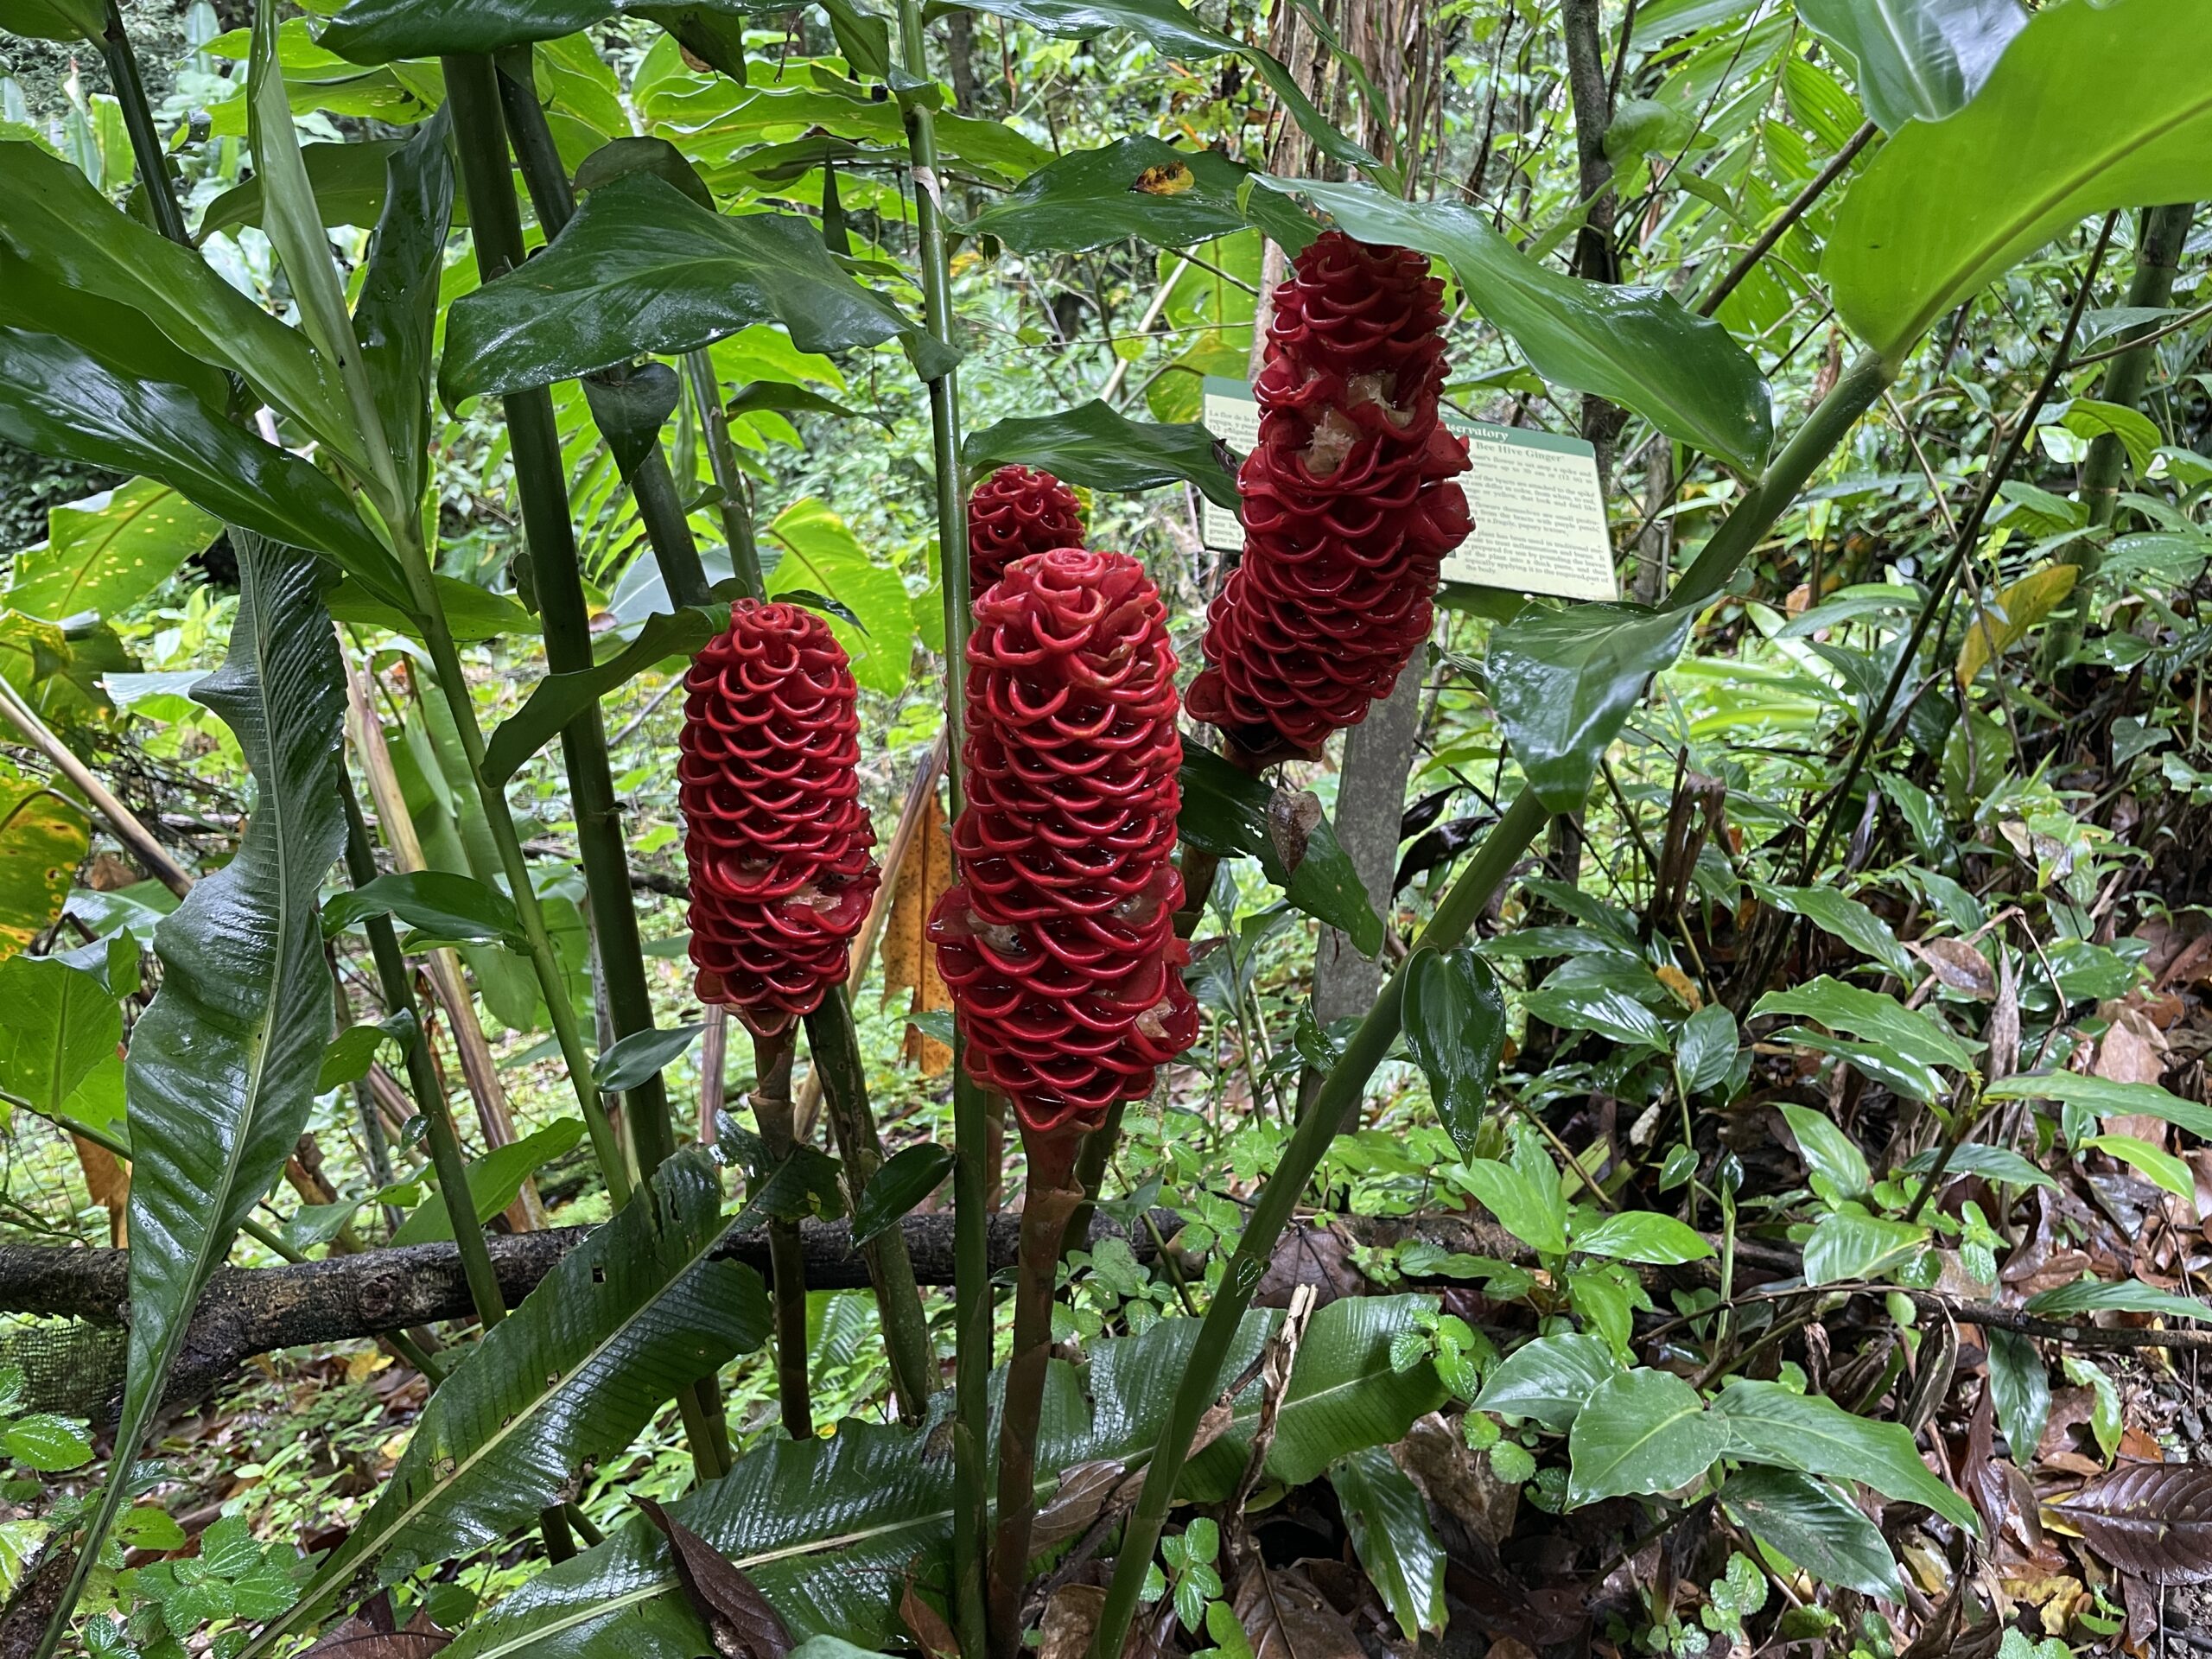 more cone than flower. Red in color, petals are layered and stacked about 12 in high with lots of space in between. and not so much a petal but a ring. 